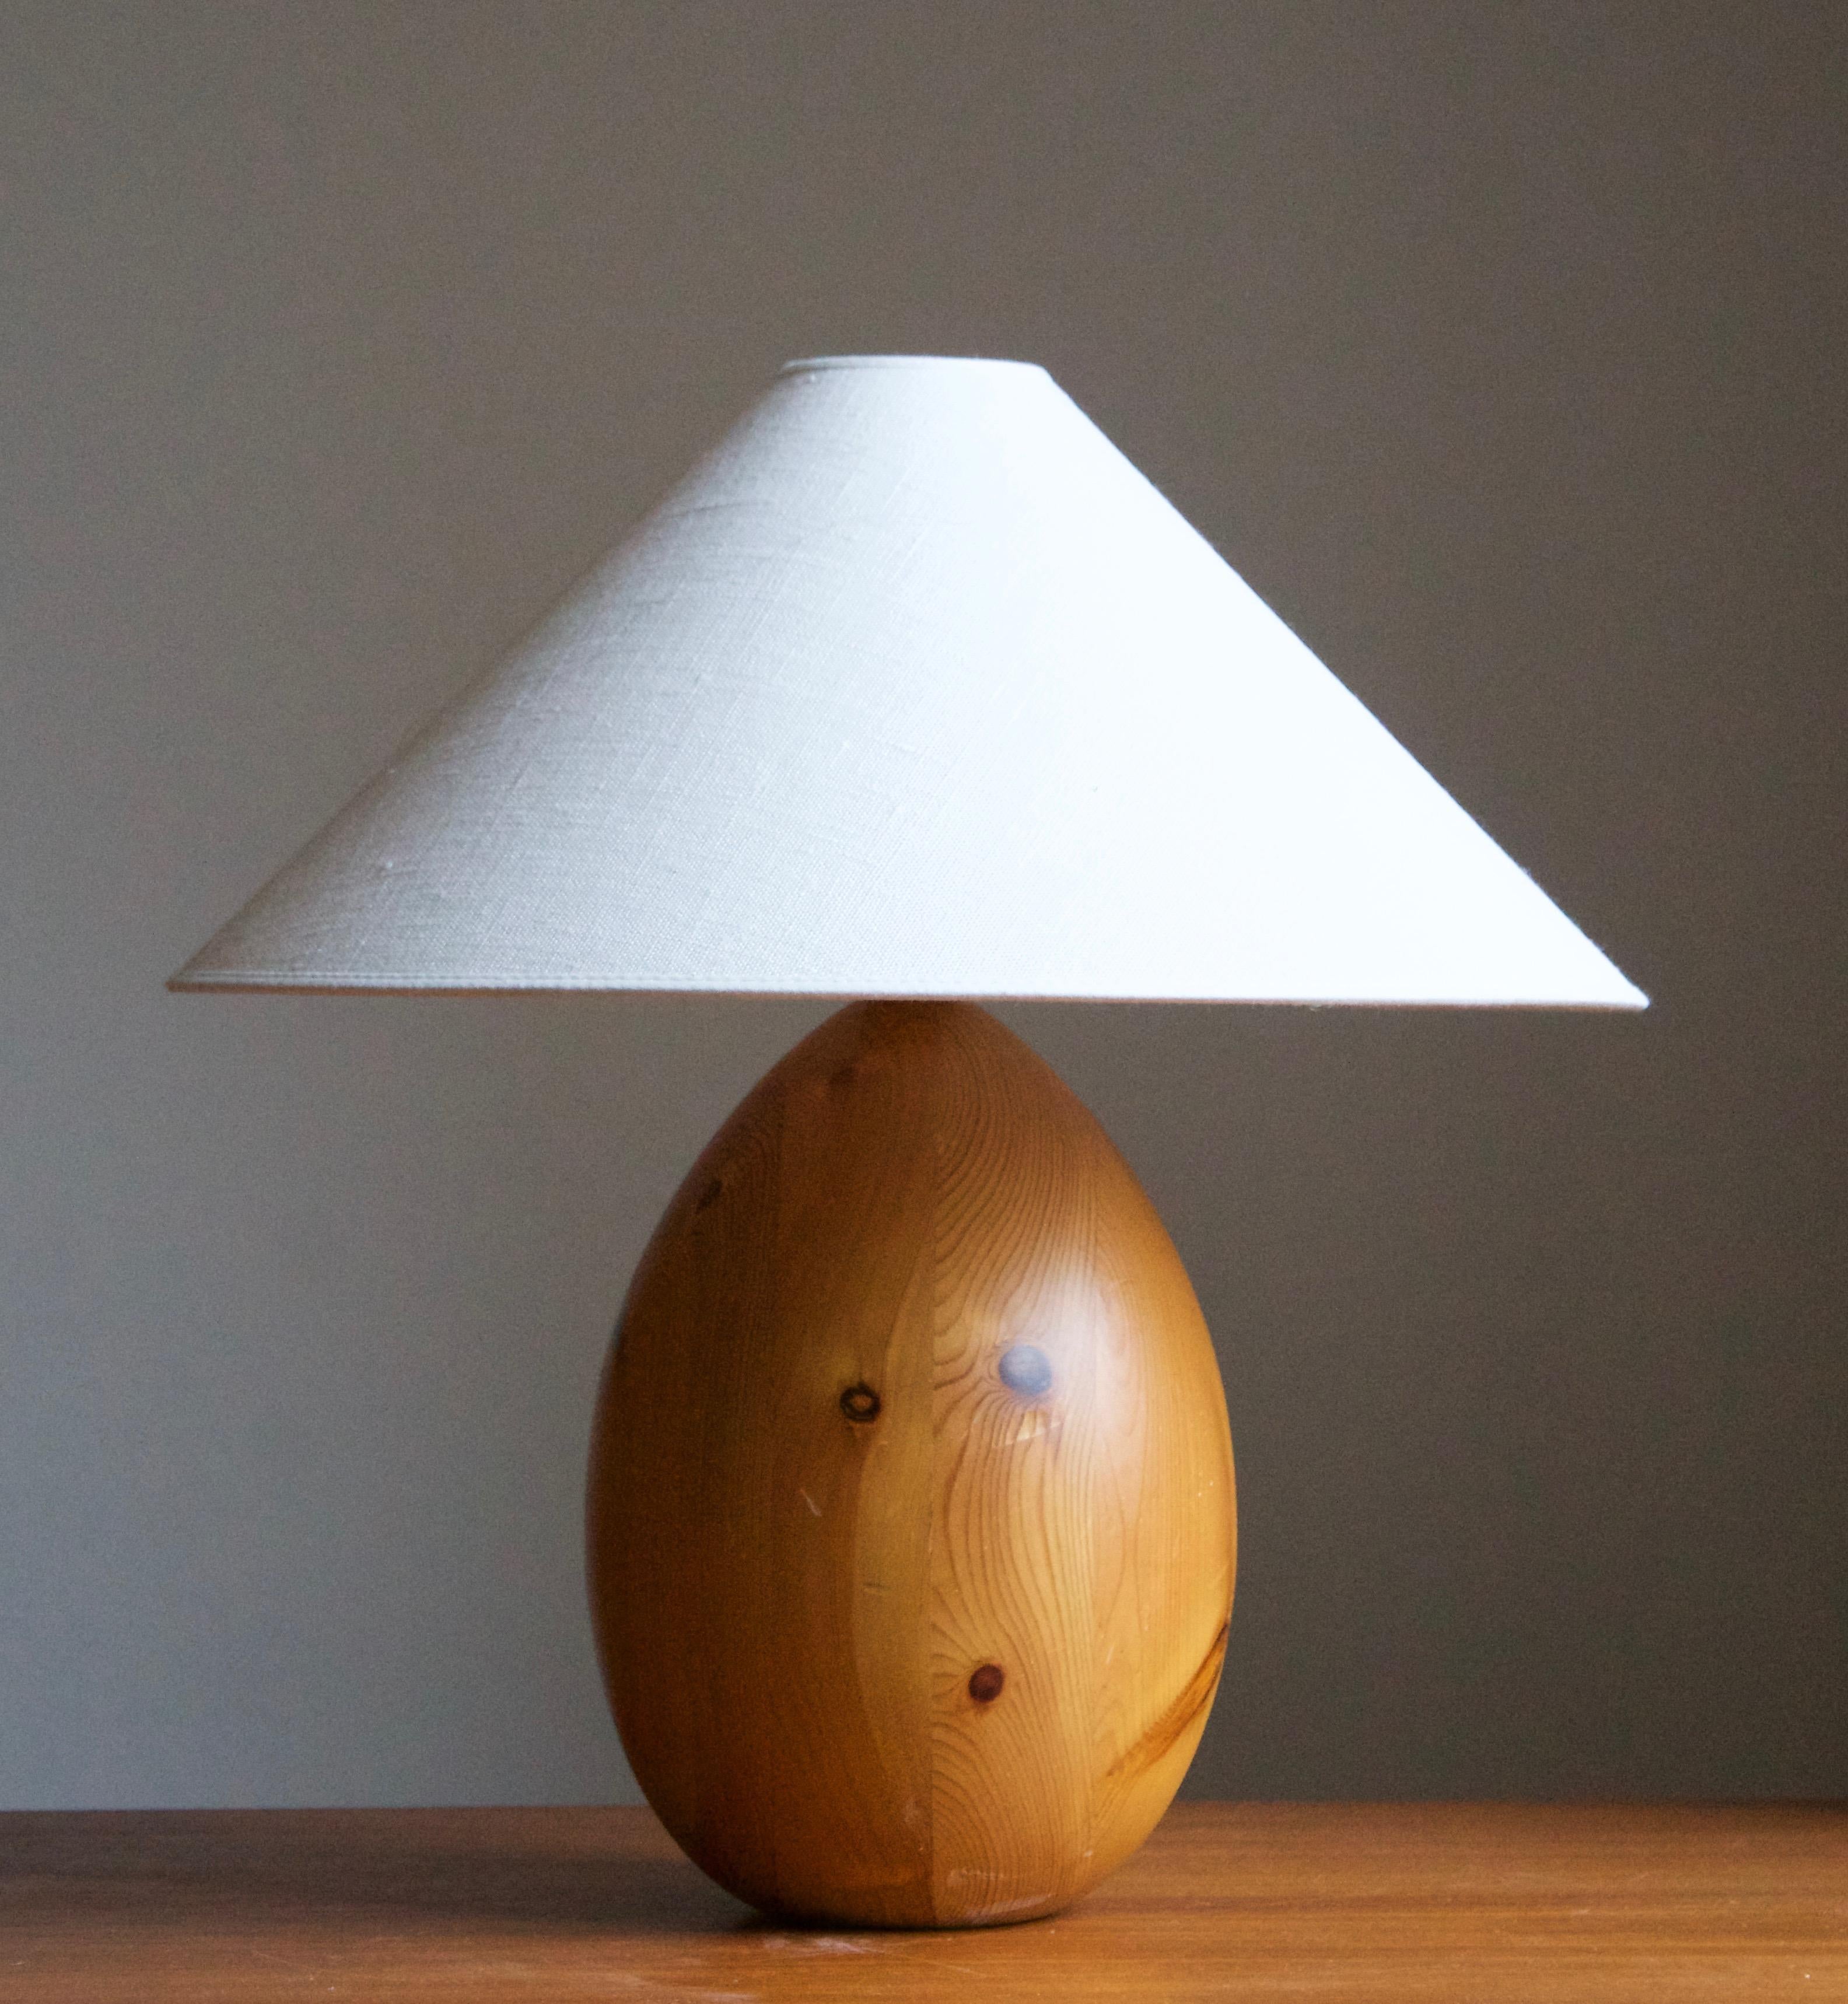 A sculptural solid pine table lamp. Designed by Uno Kristiansson, for Luxus, Sweden, 1970s. Labeled.

Stated dimensions exclude lampshade, height includes socket. Sold without lampshade.

Other designers of the period include Axel Einar Hjorth,